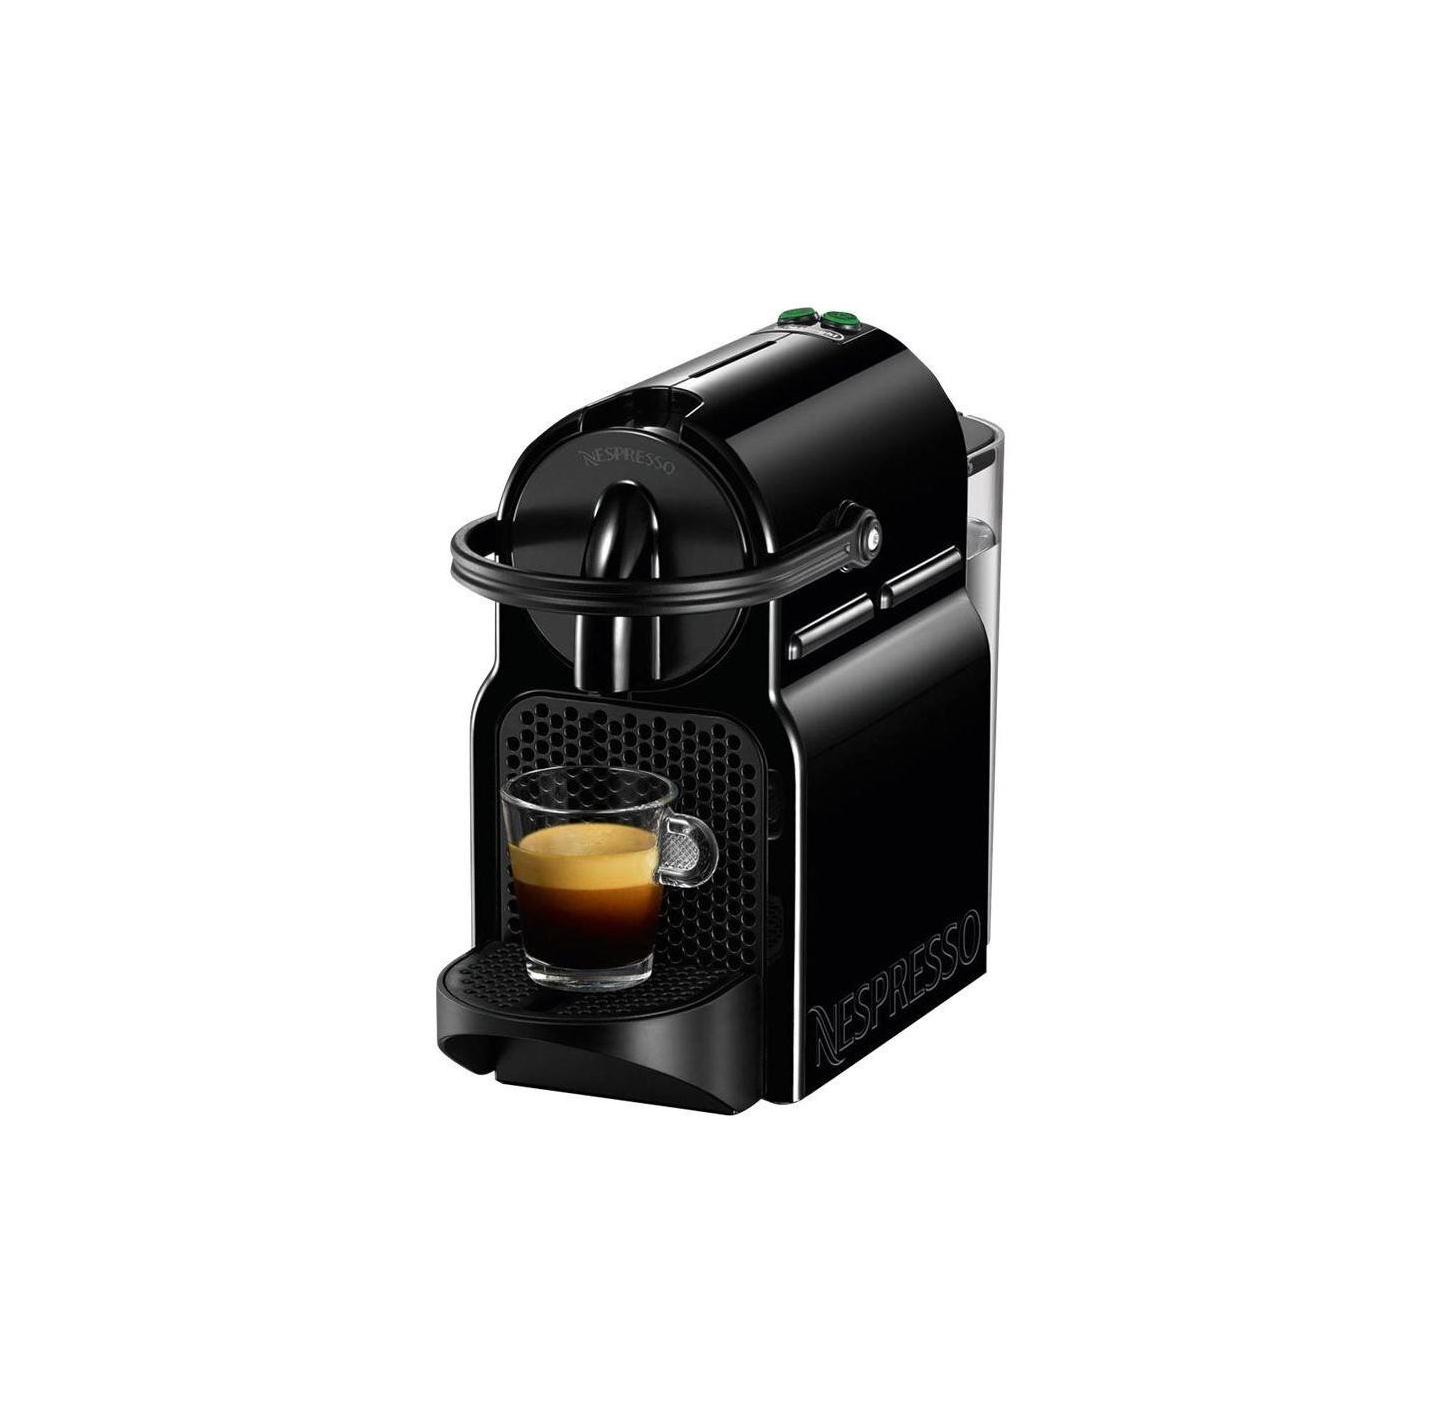 Caffè Borbone 100 Coffee Capsules Compatible Nespresso Decaffeinated Blend,  NOT COMPATIBLE with Vertuo, Flavour and Creaminess of Authenthic